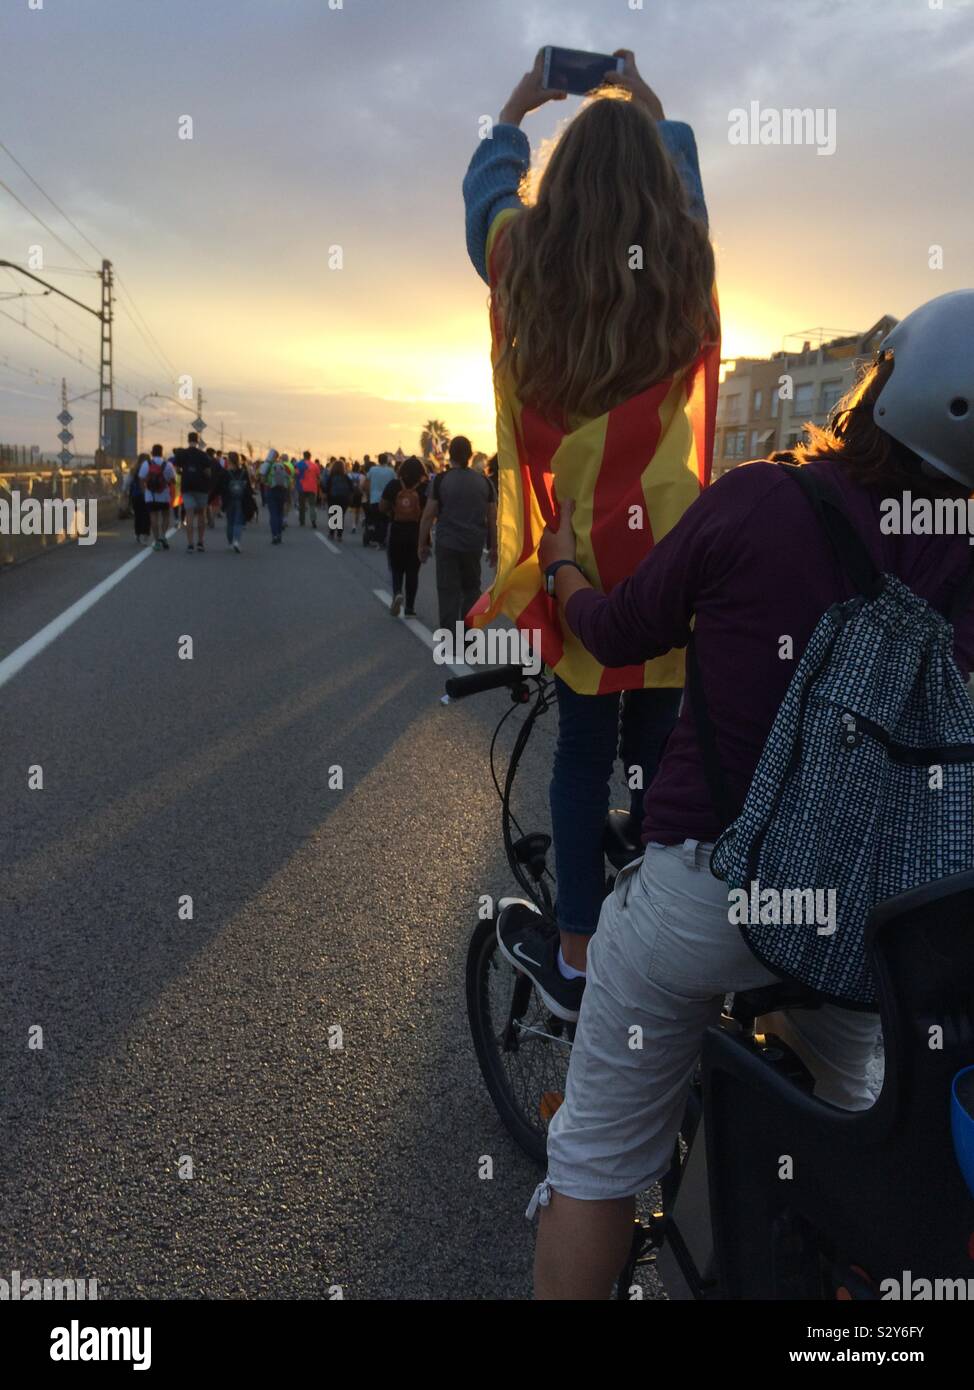 Barcelona, Catalonia, Spain. 17th Oct, 2019. Thousands of people take part in one of the so-called 'Marches for Freedom' from Girona to Barcelona city in Catalonia, Spain Stock Photo